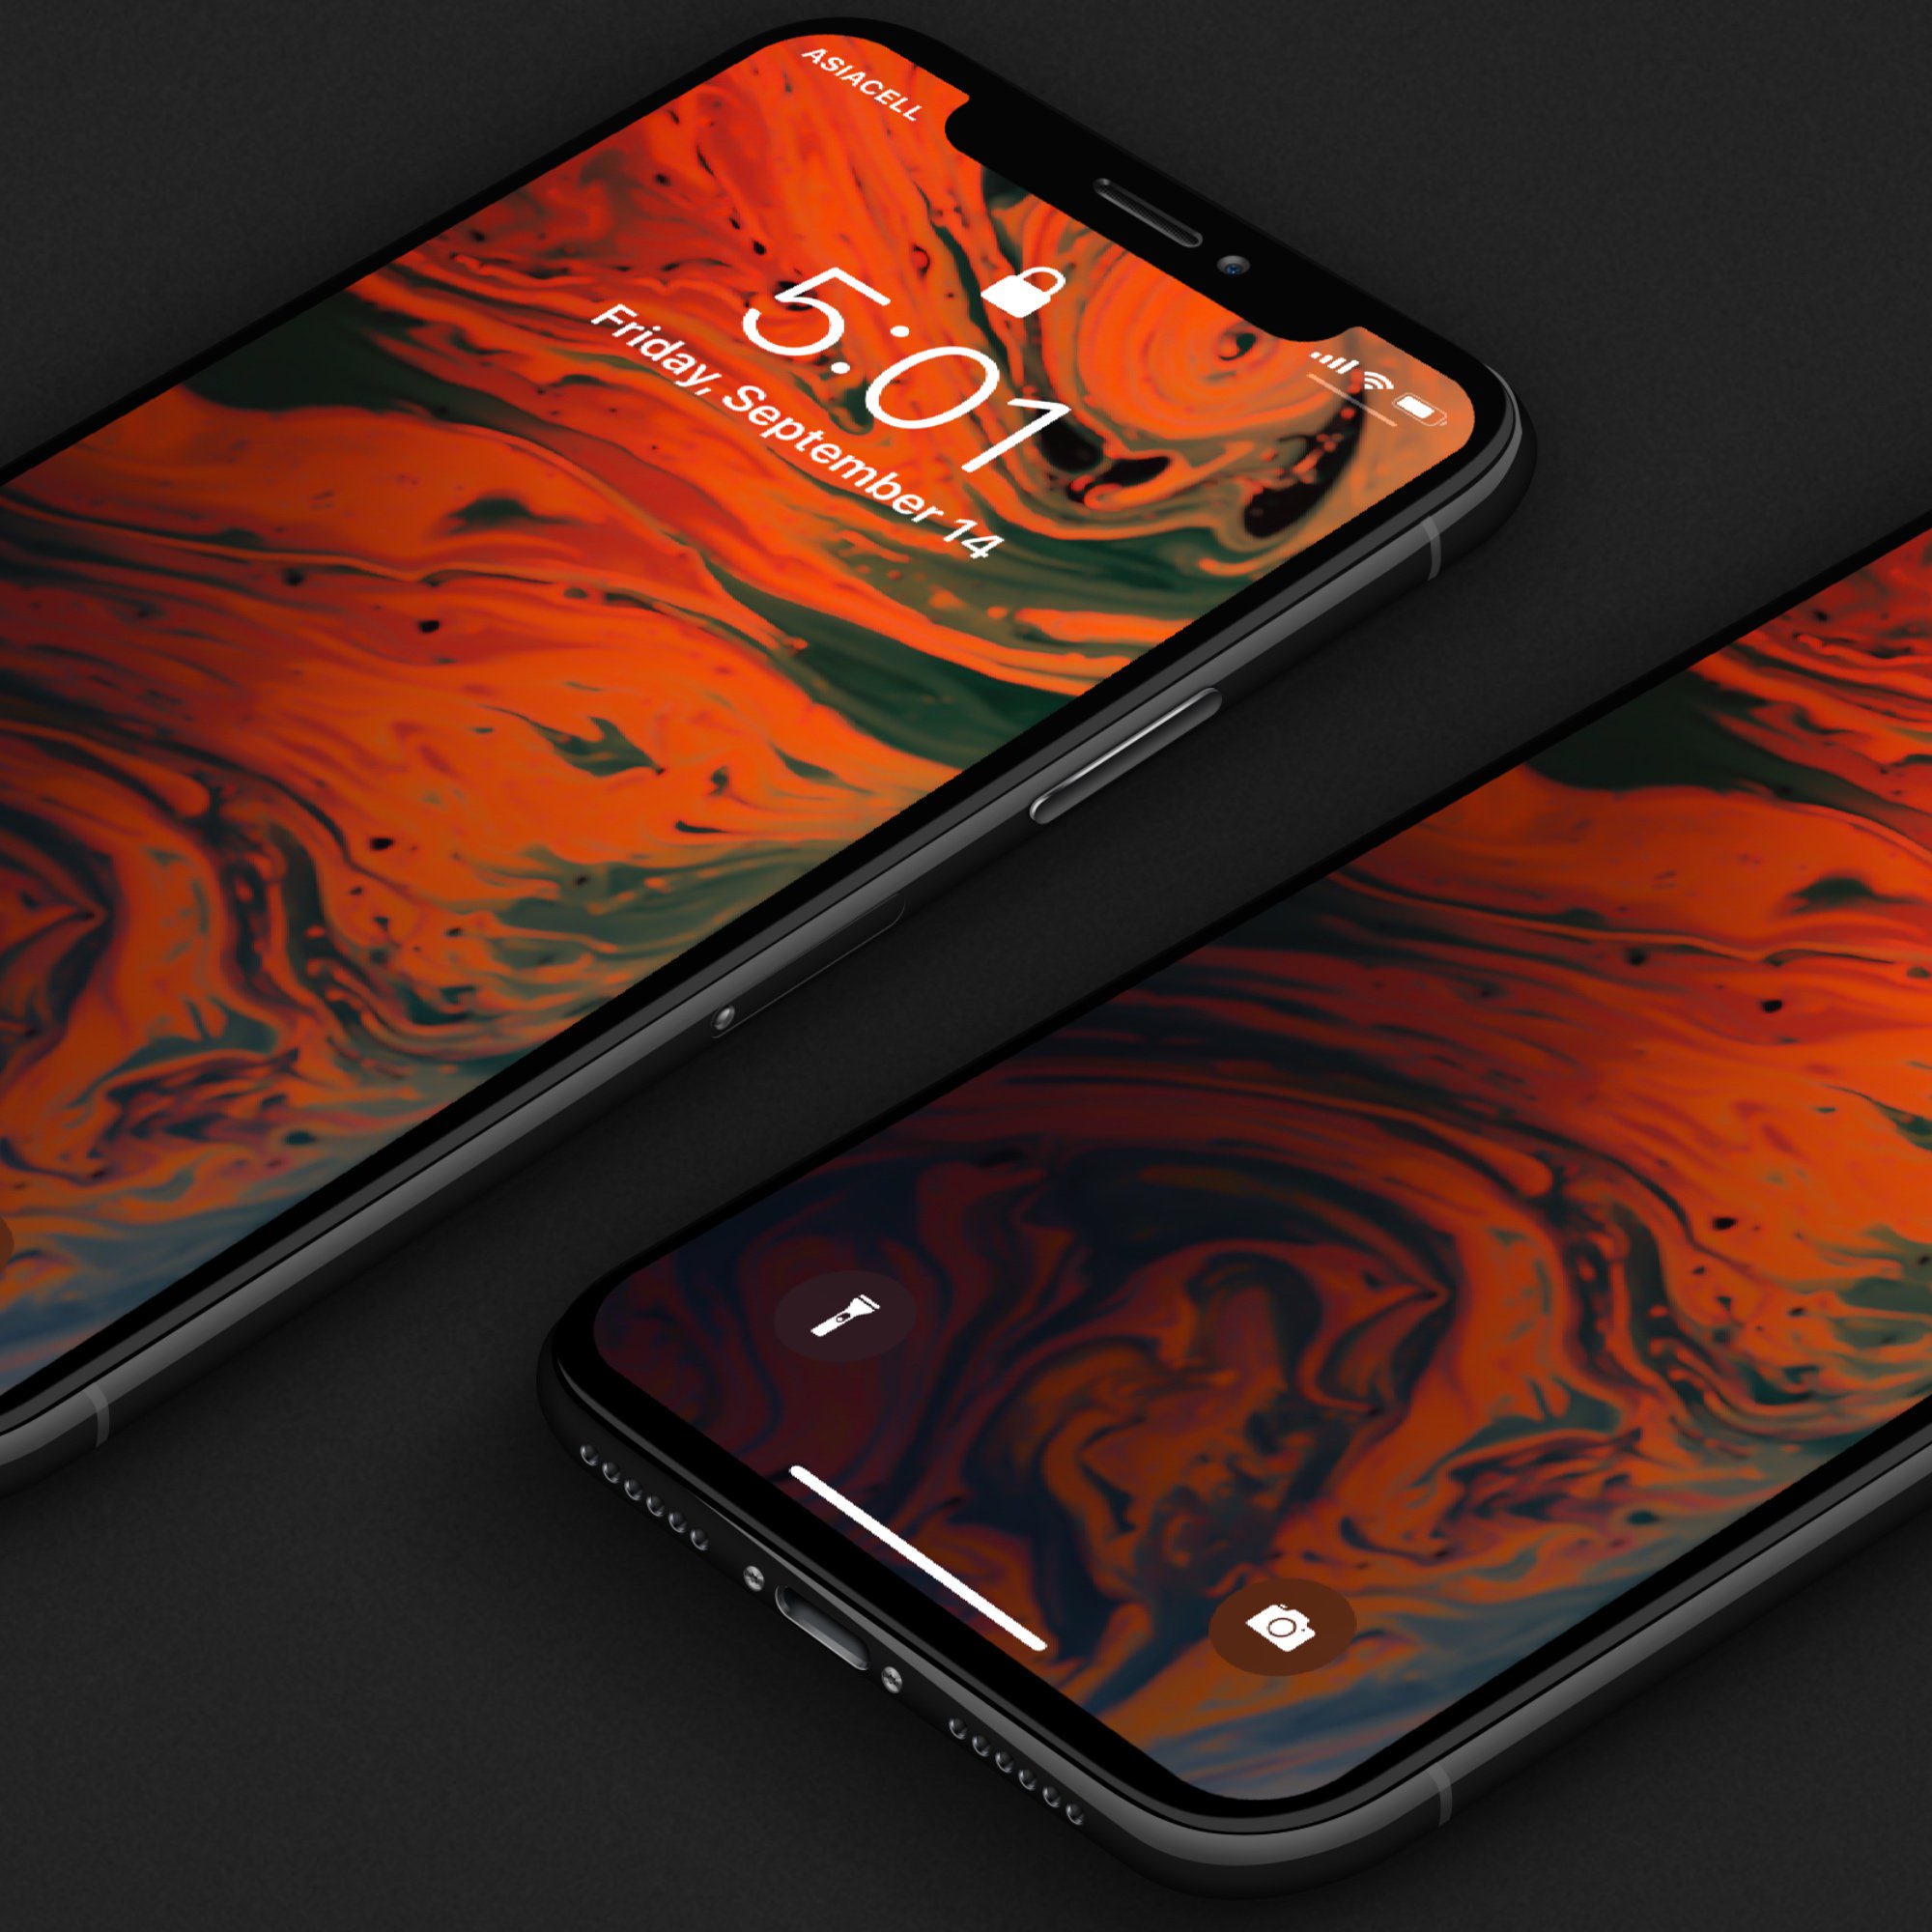 Twitterren: "making new iphone xs wallpaper available in mega for all ...